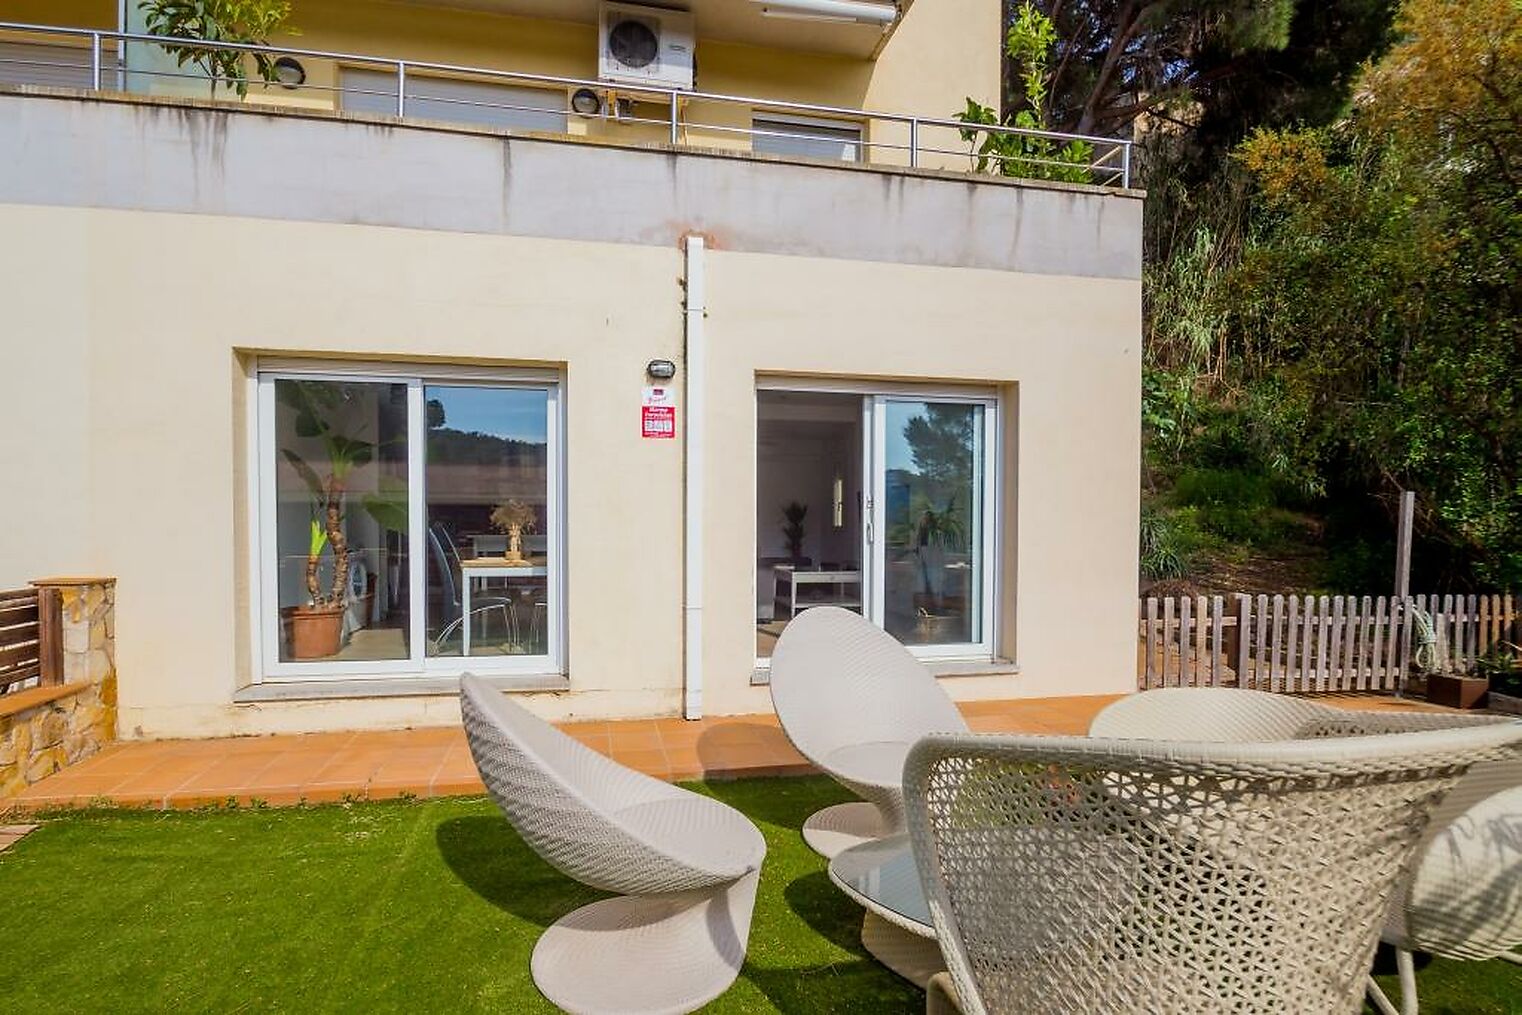 A recently renovated and very well maintained 2 bedroom apartment with a large communal pool and walking distance to the beach.